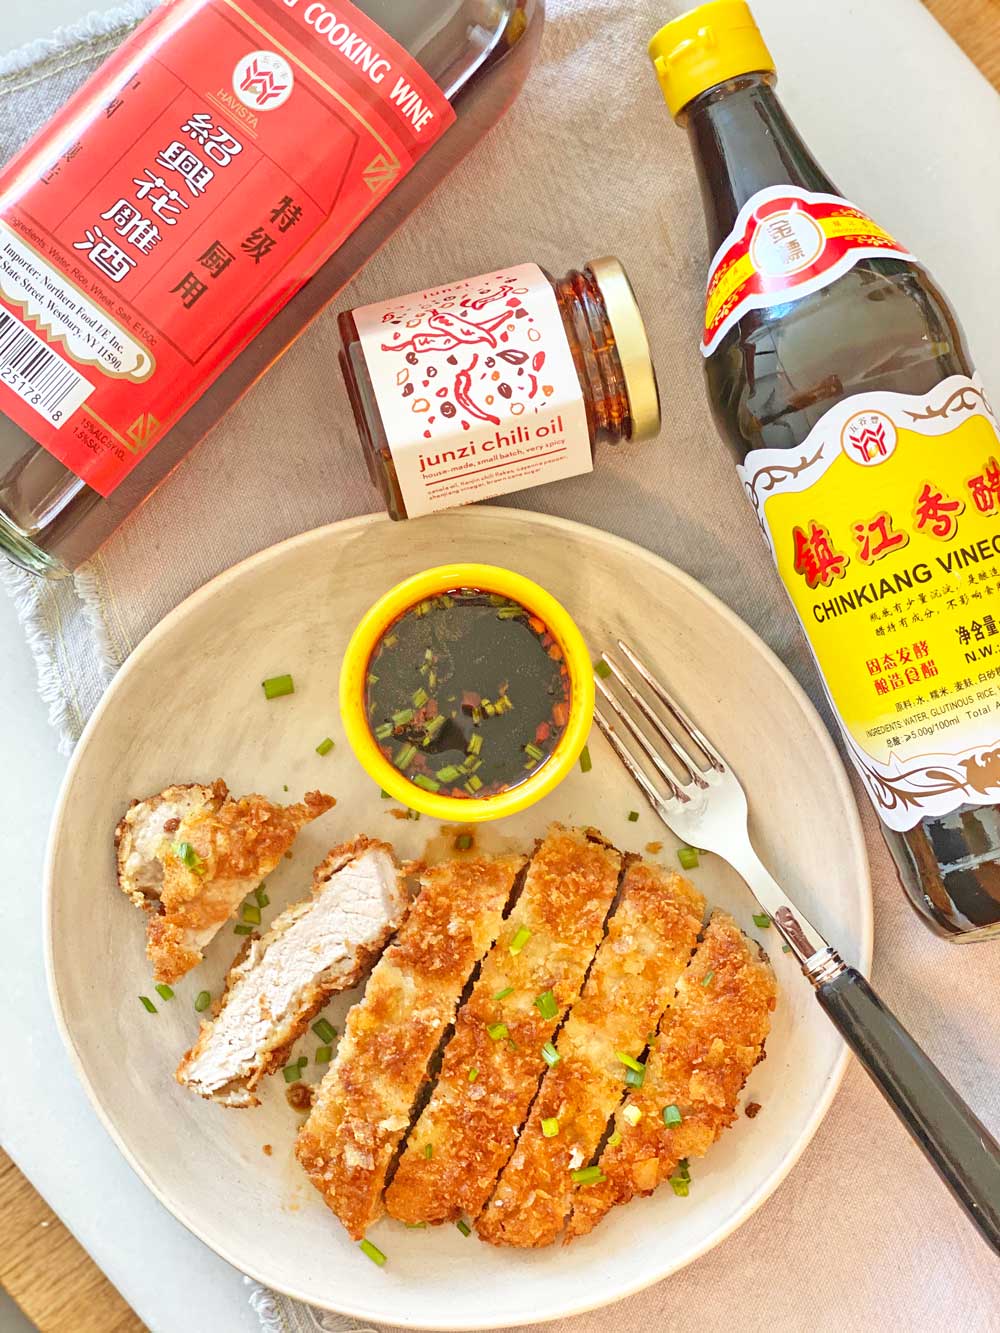 Potato Chip Crusted Pork Cutlet. Grab your potato chips, pork, and tea  brine. This is easy weeknight dinner with sandwich leftovers. Happy Cooking! www.ChopHappy.com #porkcutlet #potatochip